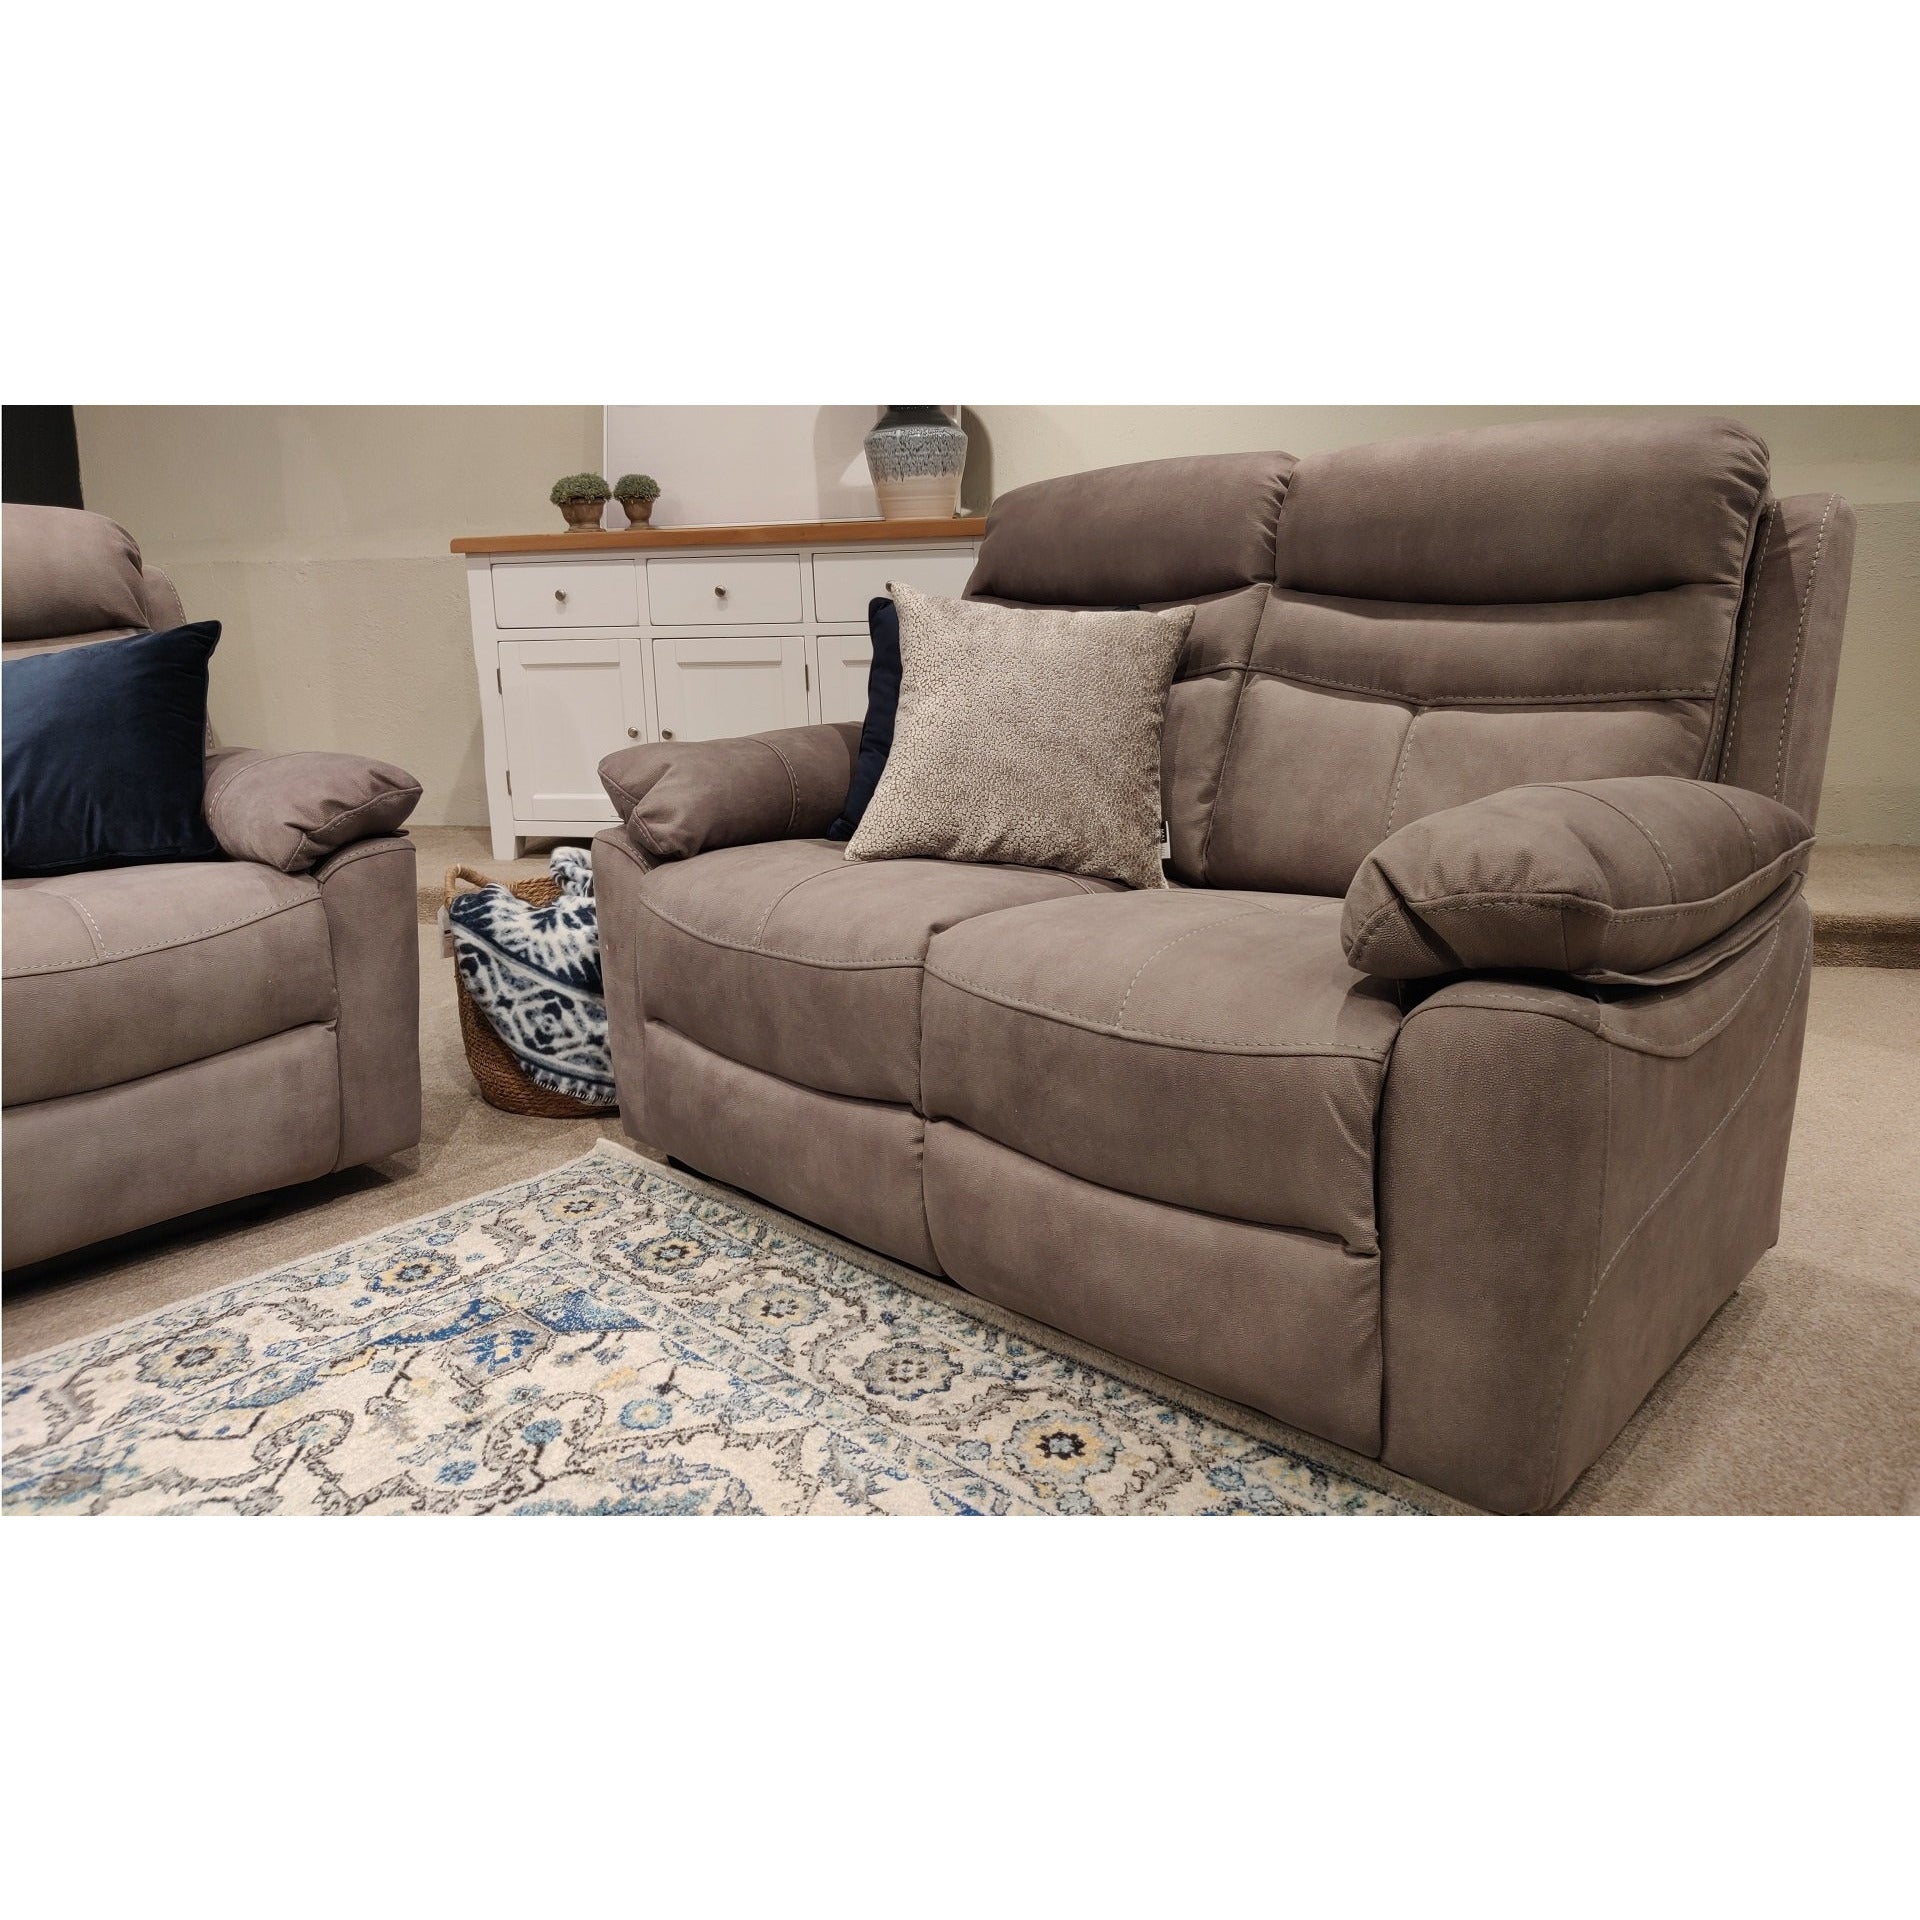 Lucy 2 Seater Recliner Grey from Upstairs Downstairs Furniture in Lisburn, Monaghan and Enniskillen